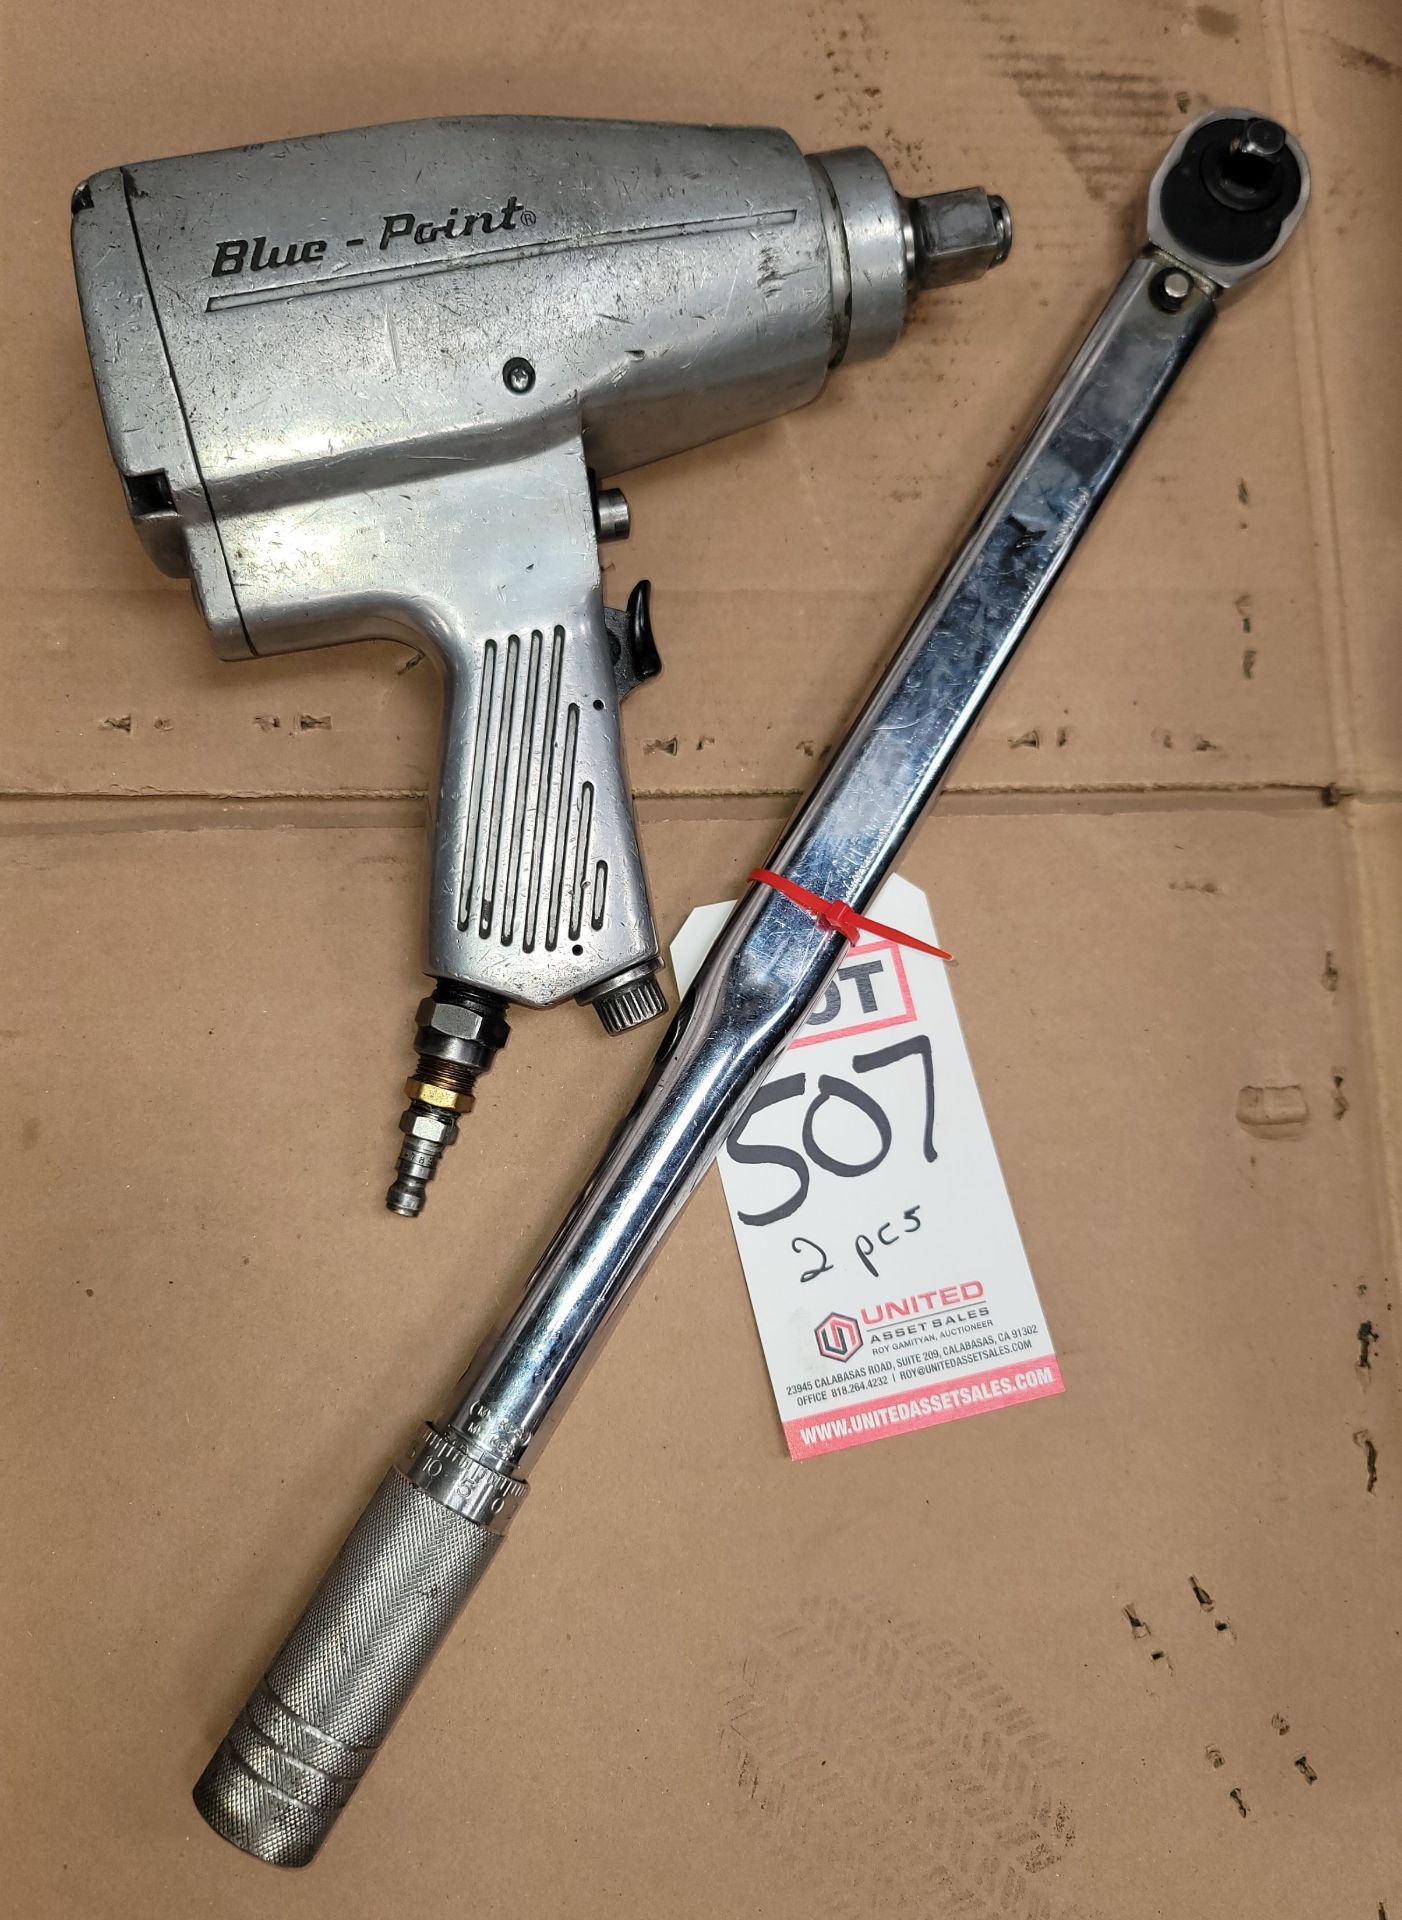 LOT - (1) BLUE POINT 3/4" DRIVE AIR RATCHET, MODEL AT-770 AND (1) STORM 1/2" DRIVE TORQUE WRENCH,